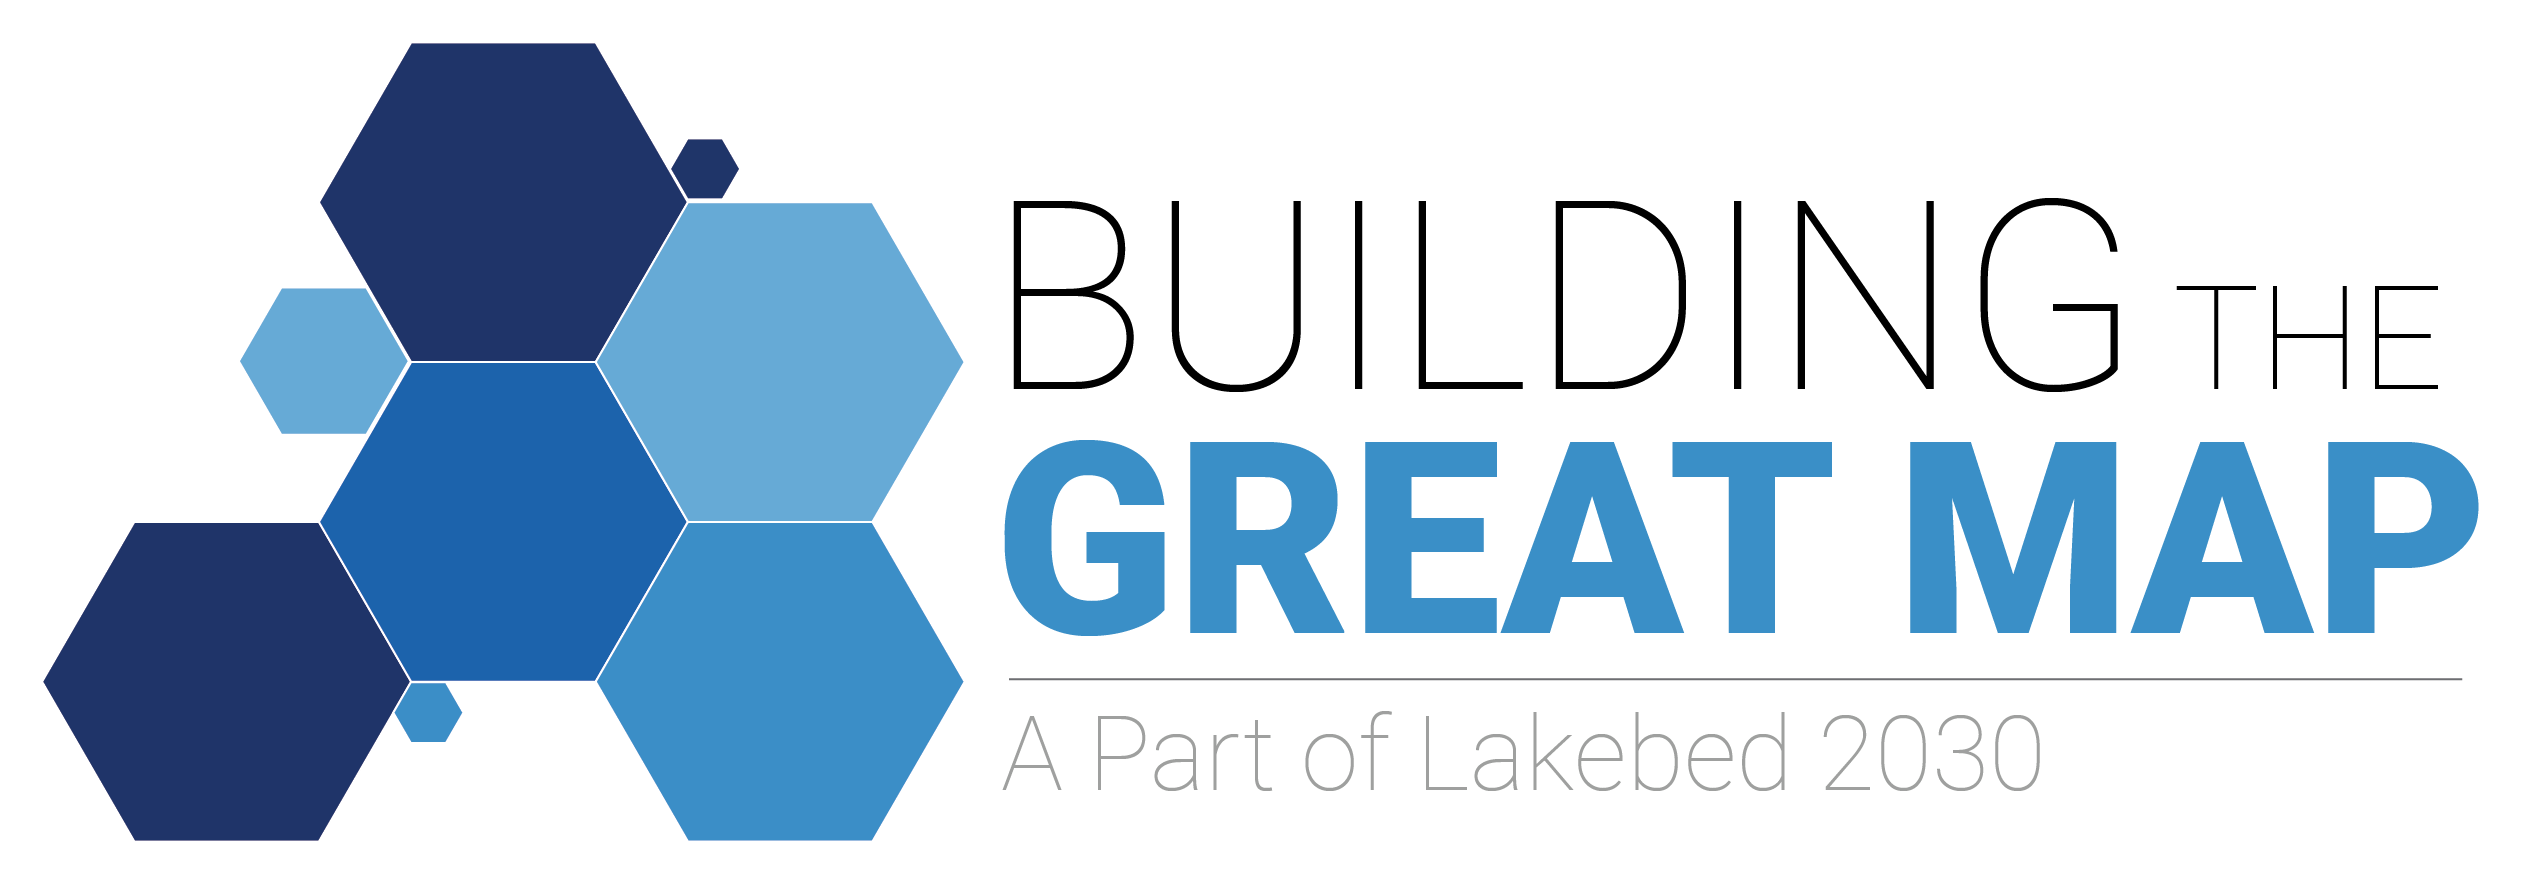 Building the Great Map Logo